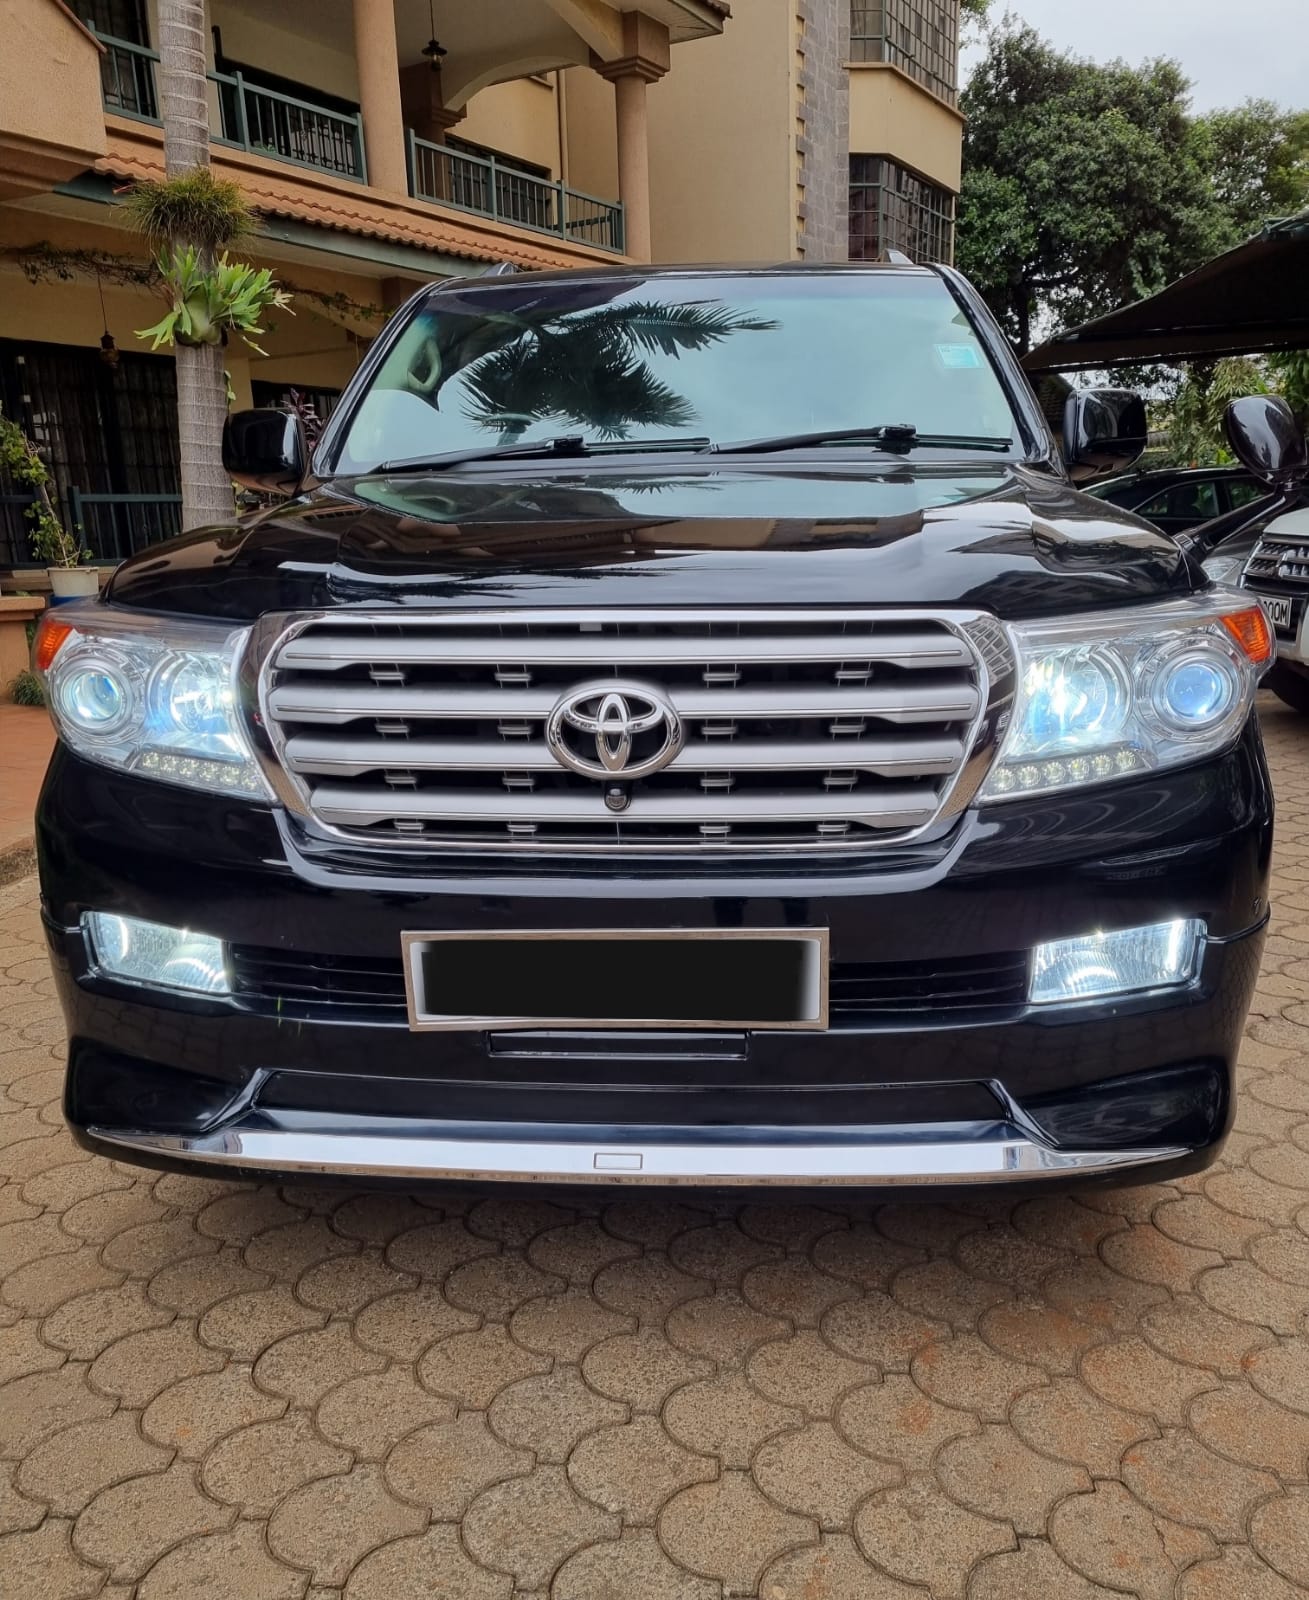 Cars Cars For Sale/Vehicles SUV-Toyota Landcruiser VX V8 2008 Cleanest As New Cheapest offer 6